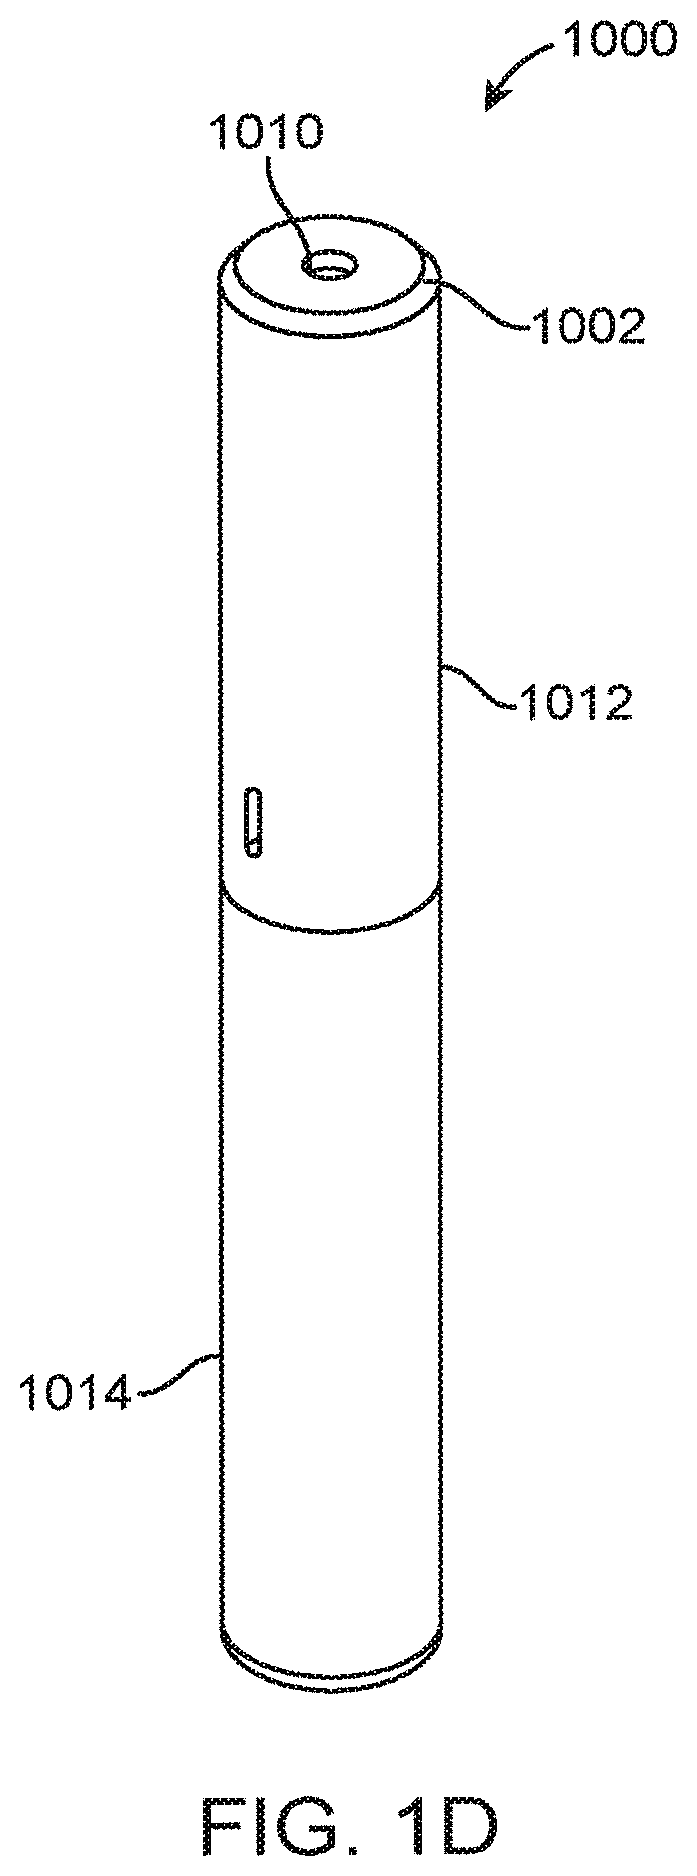 Hand-held inhalable vapor producing device and method